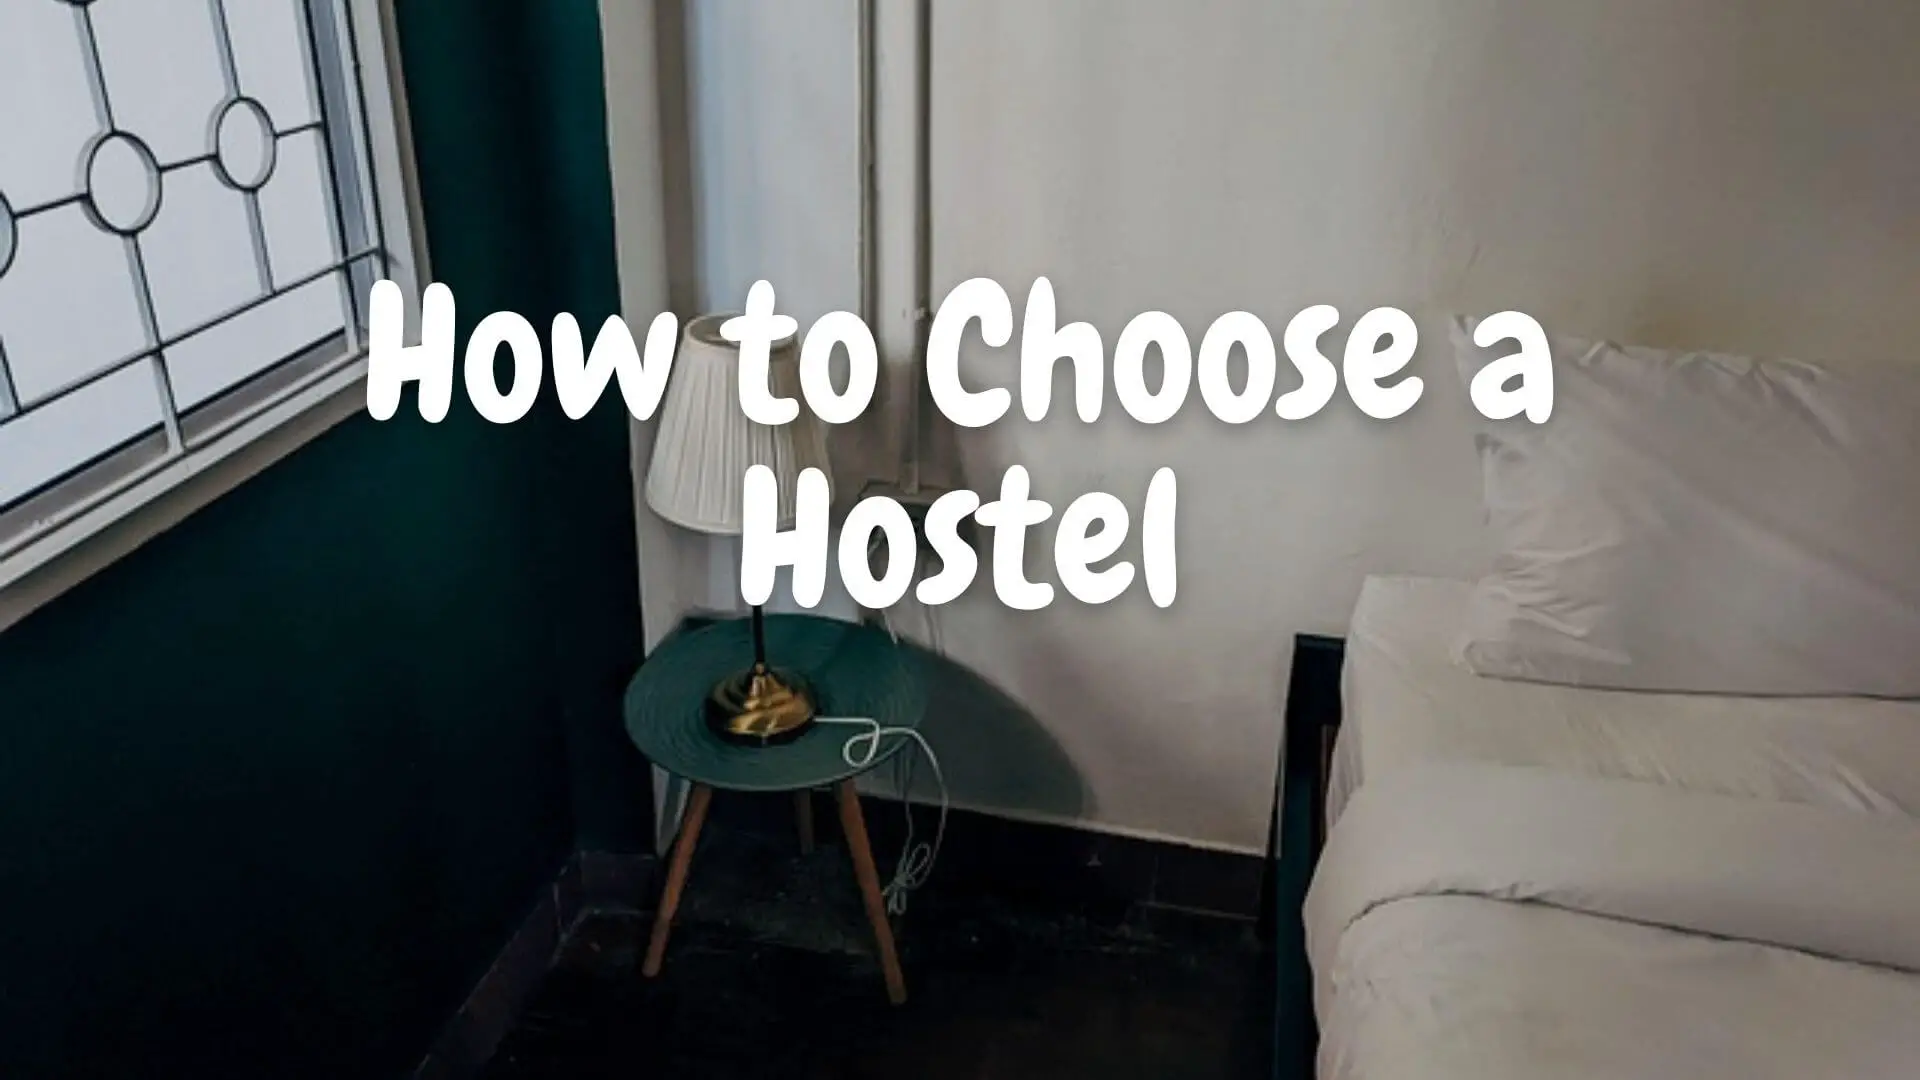 How to Choose a Hostel